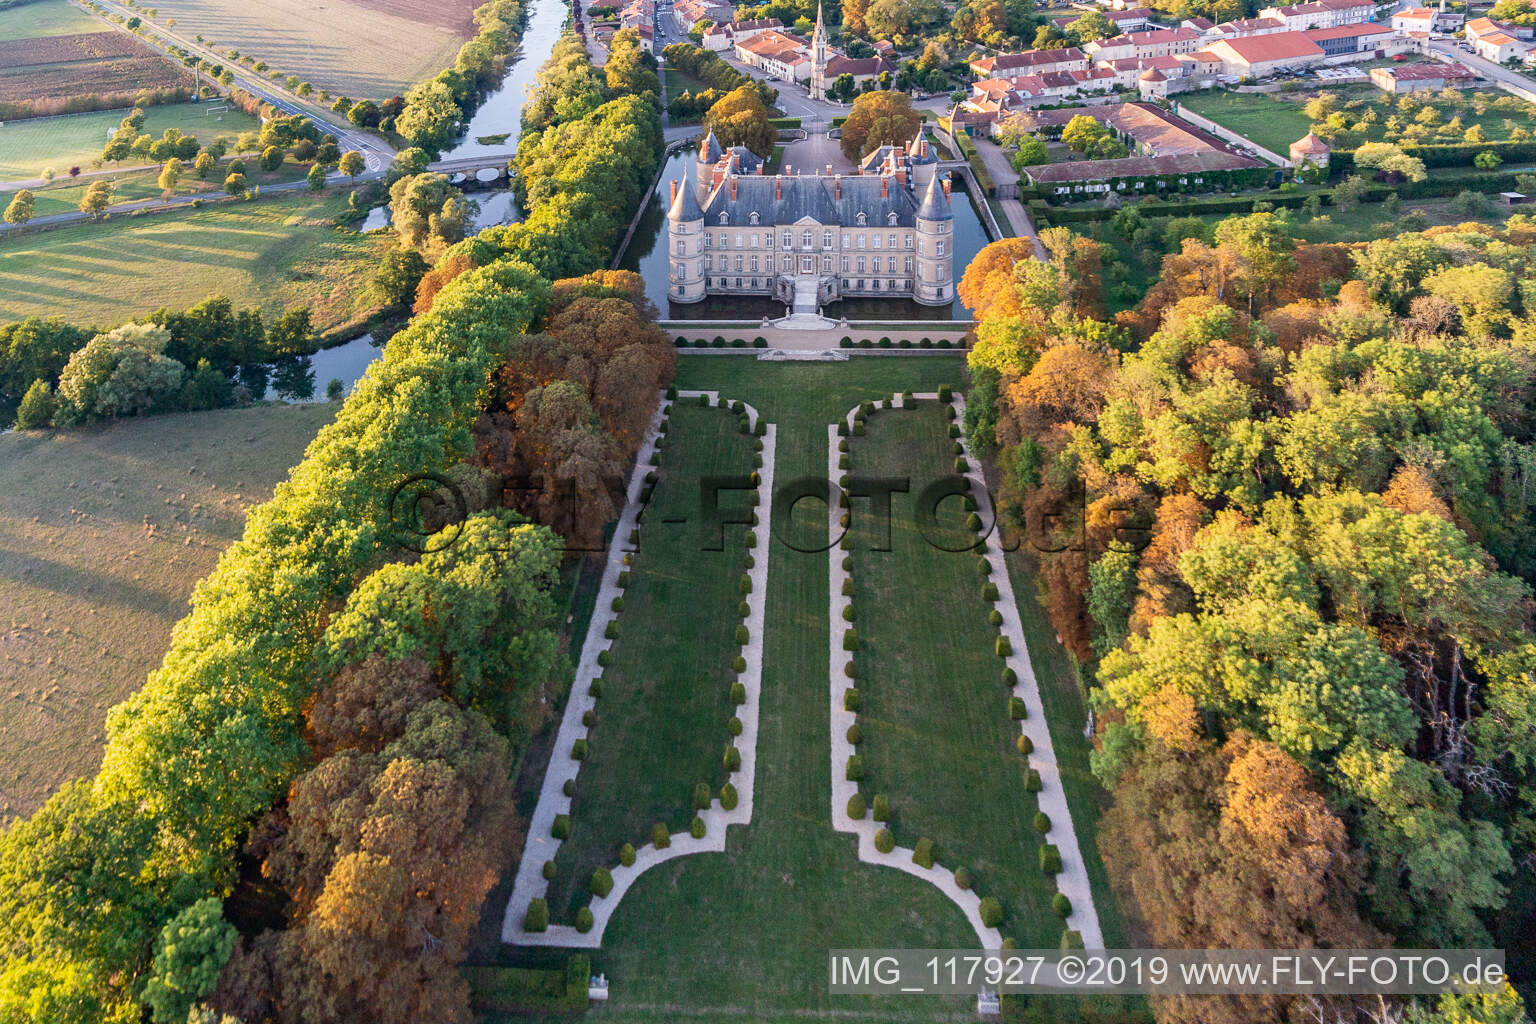 Aerial view of Building and castle park systems of water castle Chateau d'Haroue in Haroue in Grand Est, France